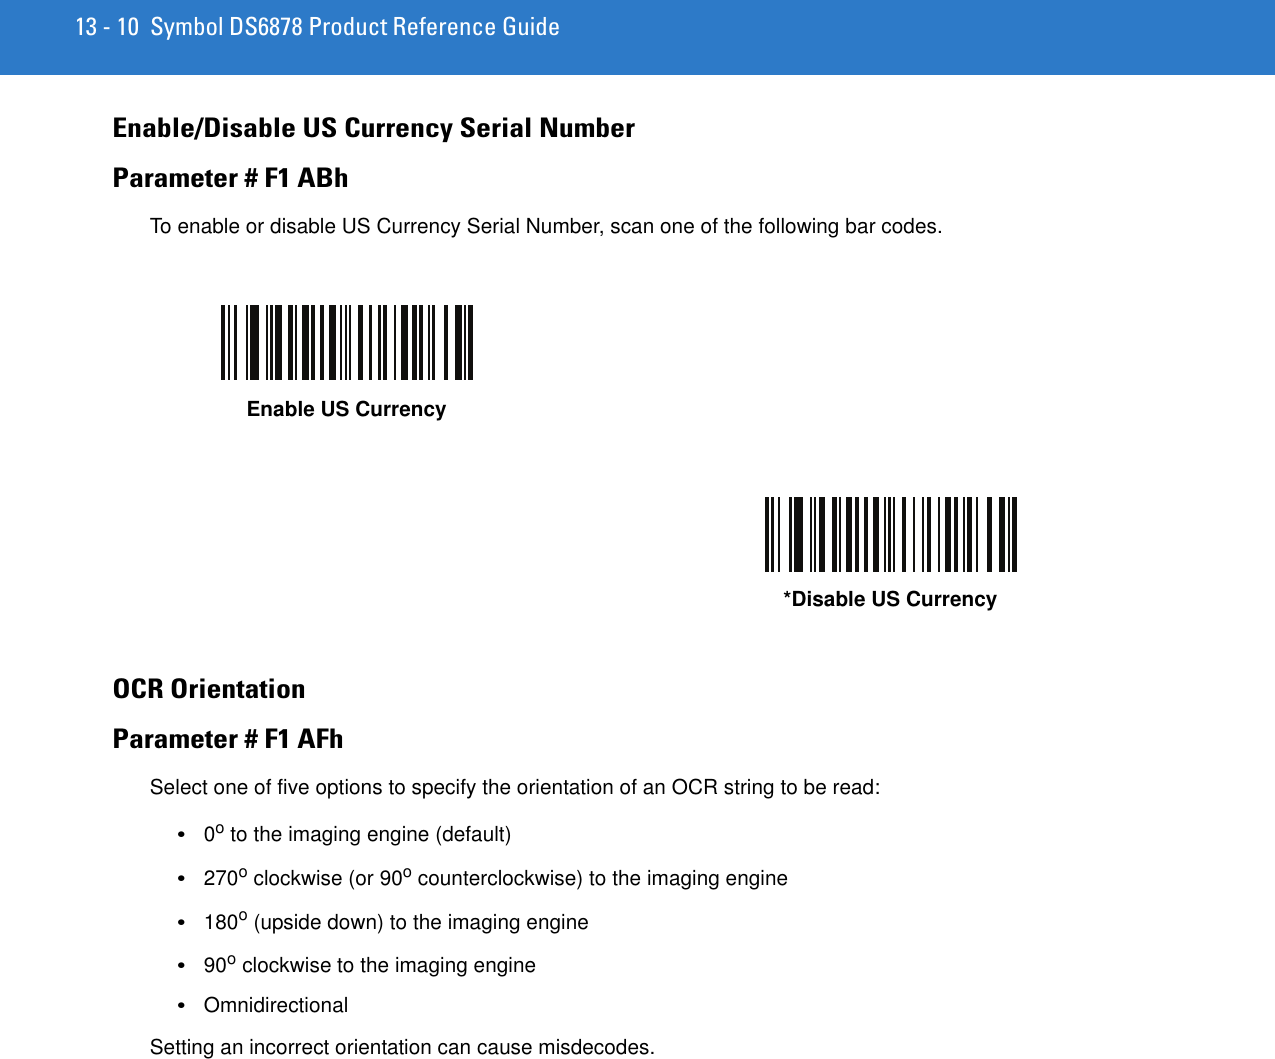 13 - 10 Symbol DS6878 Product Reference GuideEnable/Disable US Currency Serial NumberParameter # F1 ABhTo enable or disable US Currency Serial Number, scan one of the following bar codes.OCR OrientationParameter # F1 AFhSelect one of five options to specify the orientation of an OCR string to be read:•0o to the imaging engine (default)•270o clockwise (or 90o counterclockwise) to the imaging engine•180o (upside down) to the imaging engine•90o clockwise to the imaging engine•OmnidirectionalSetting an incorrect orientation can cause misdecodes.Enable US Currency*Disable US Currency